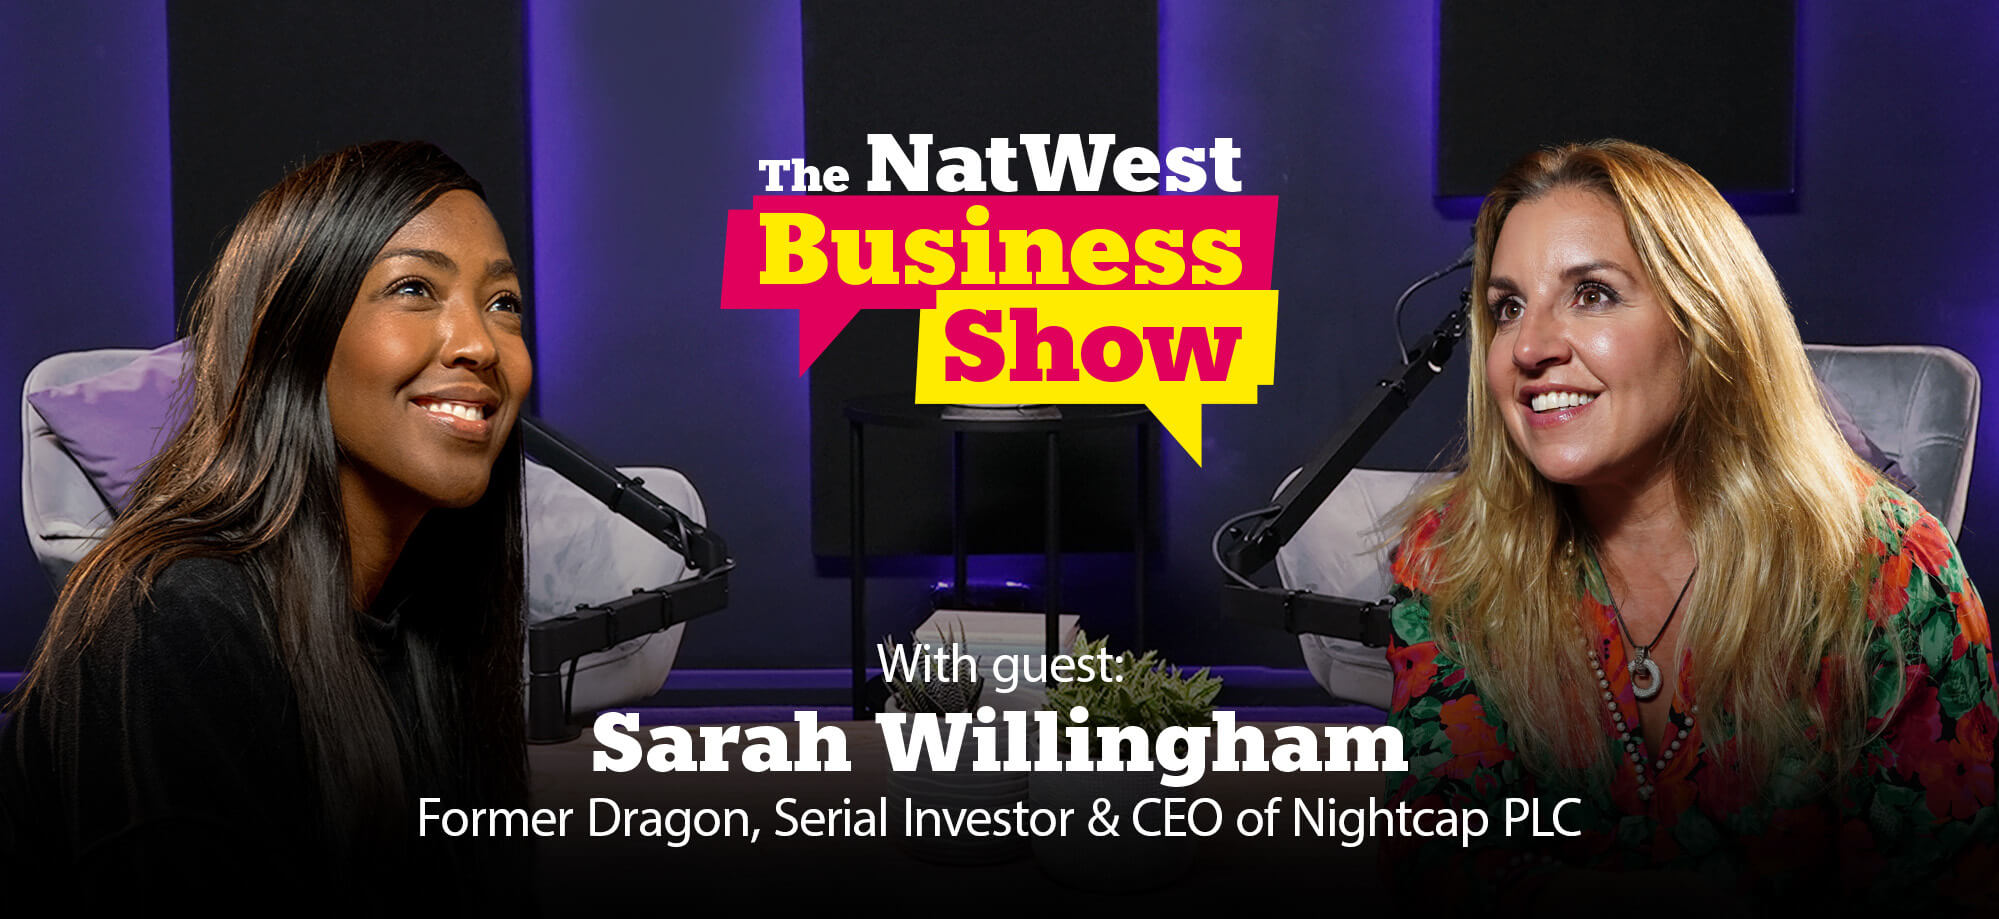 Angelica Bell and Sarah Willingham in front of Business Show logo